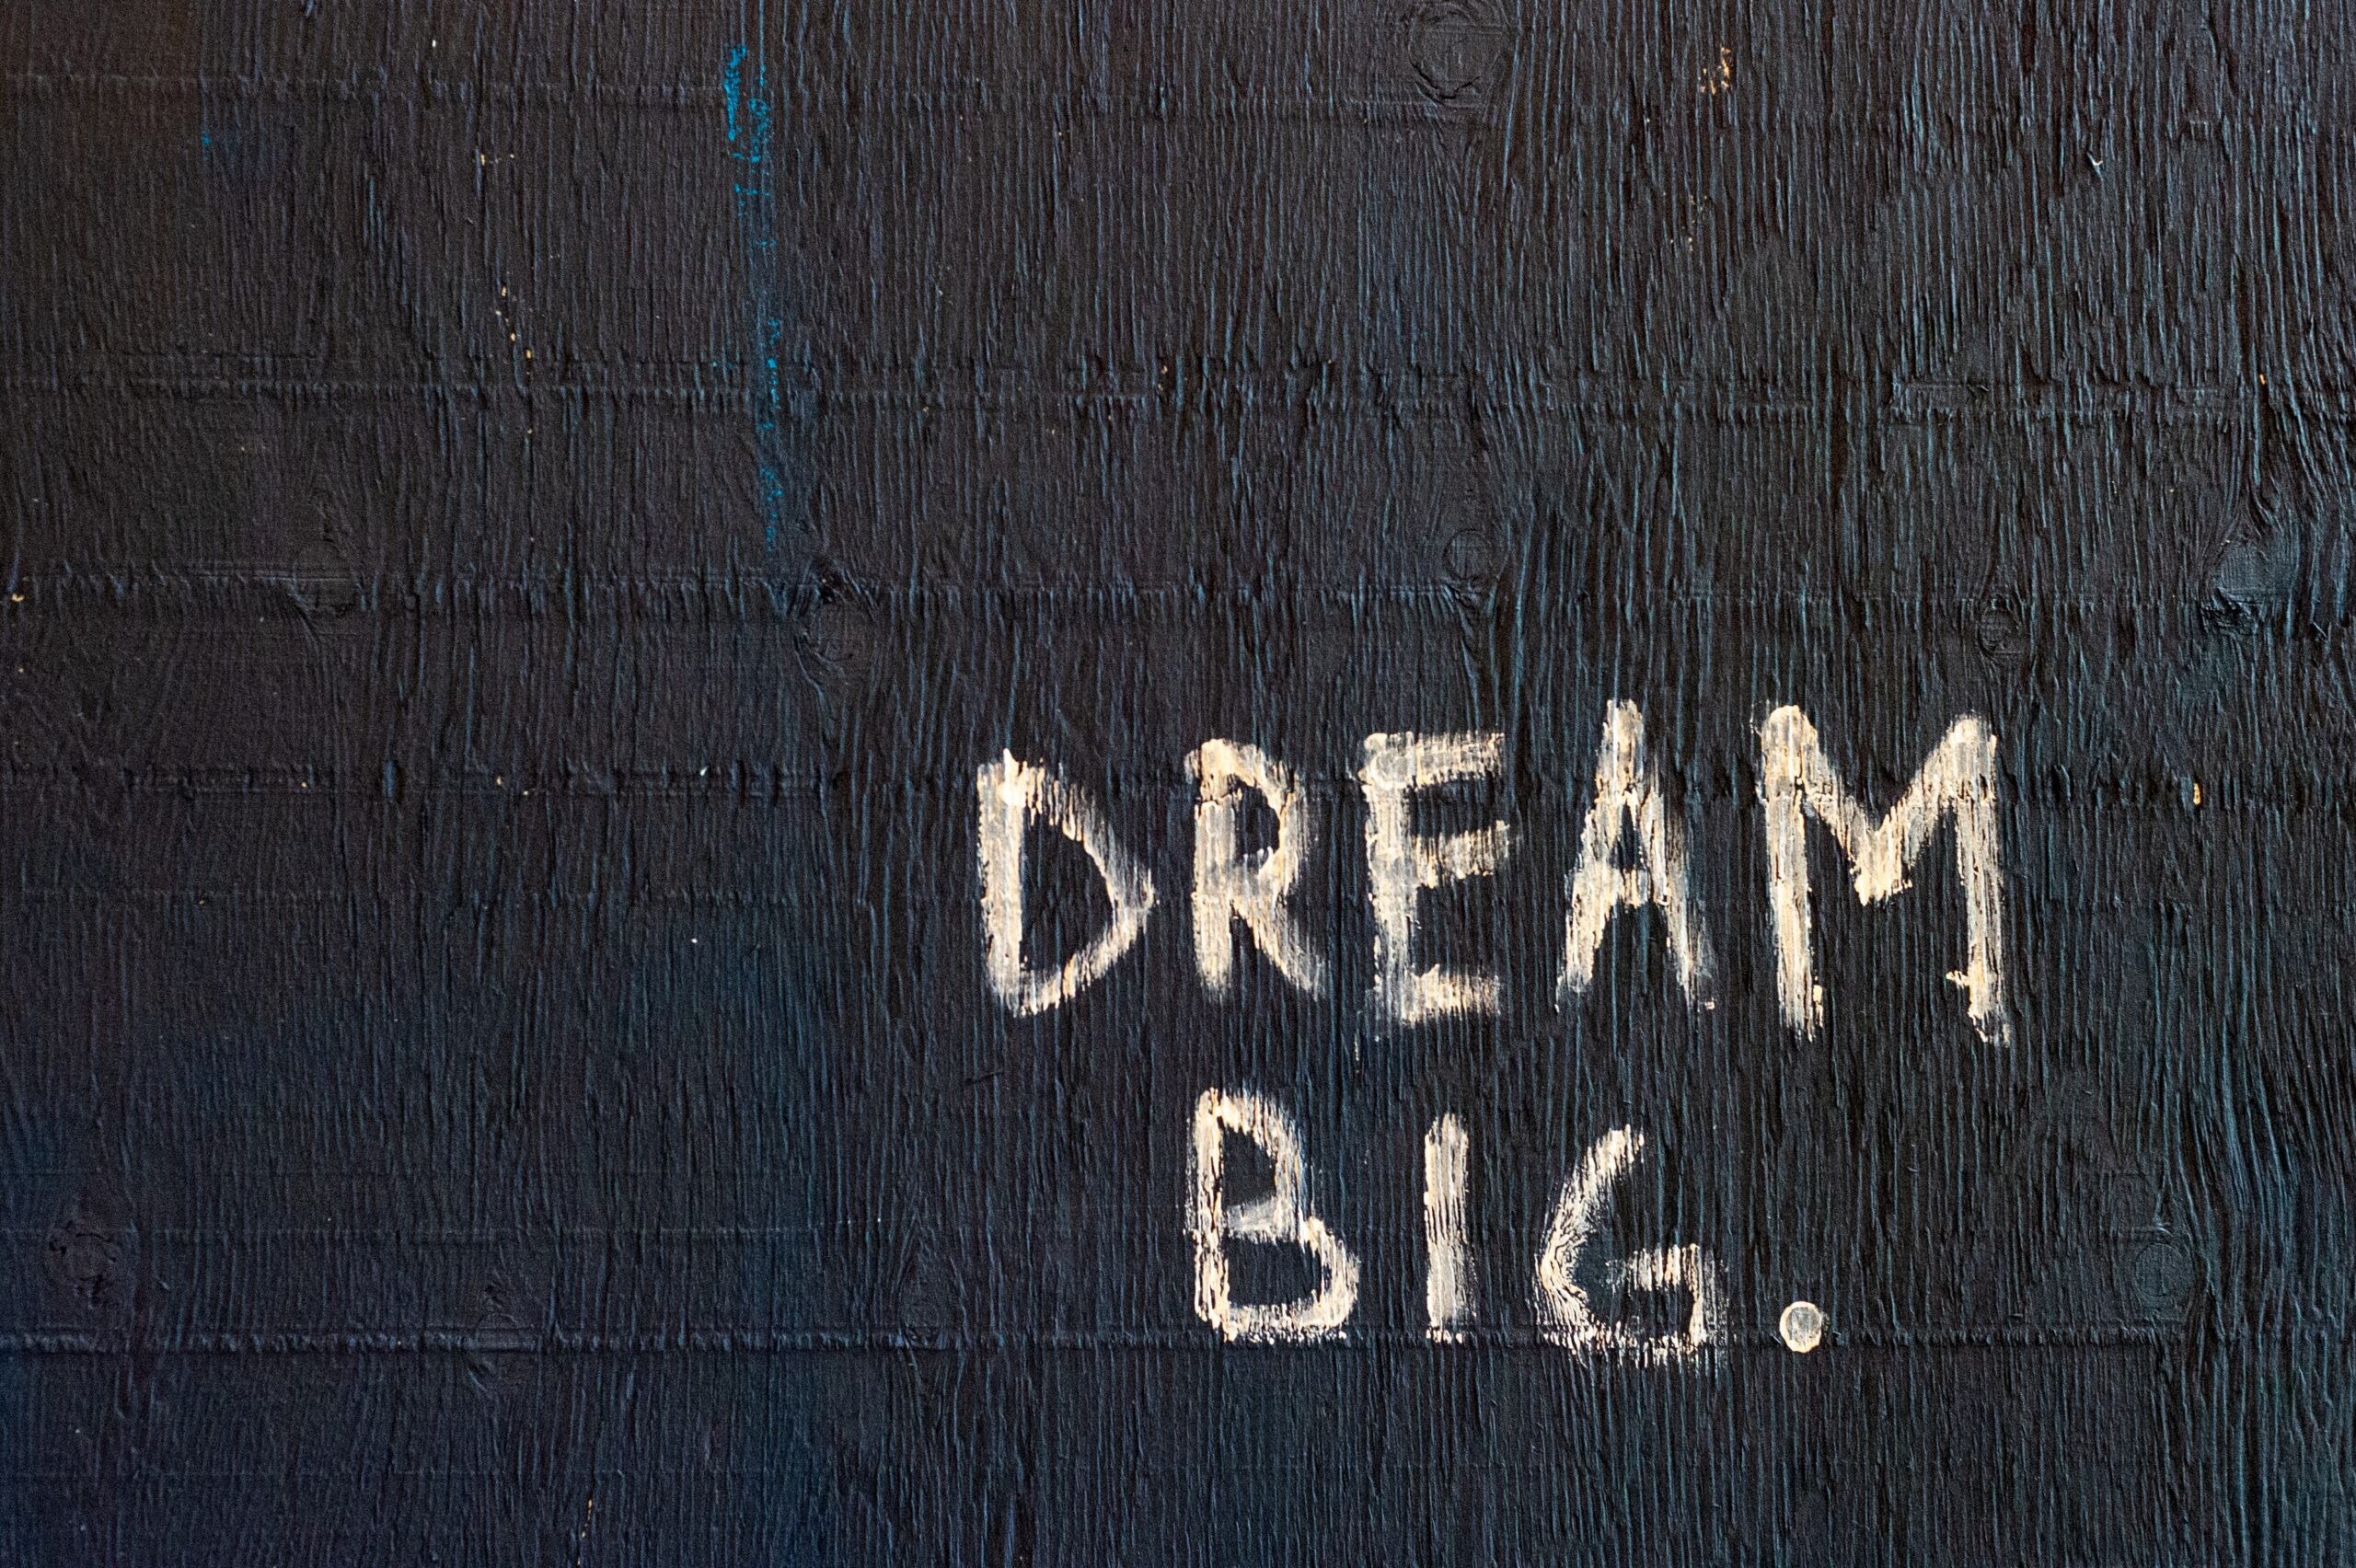 black background with text in white saying DREAM BIG supporting the blog to help teenagers choose their career